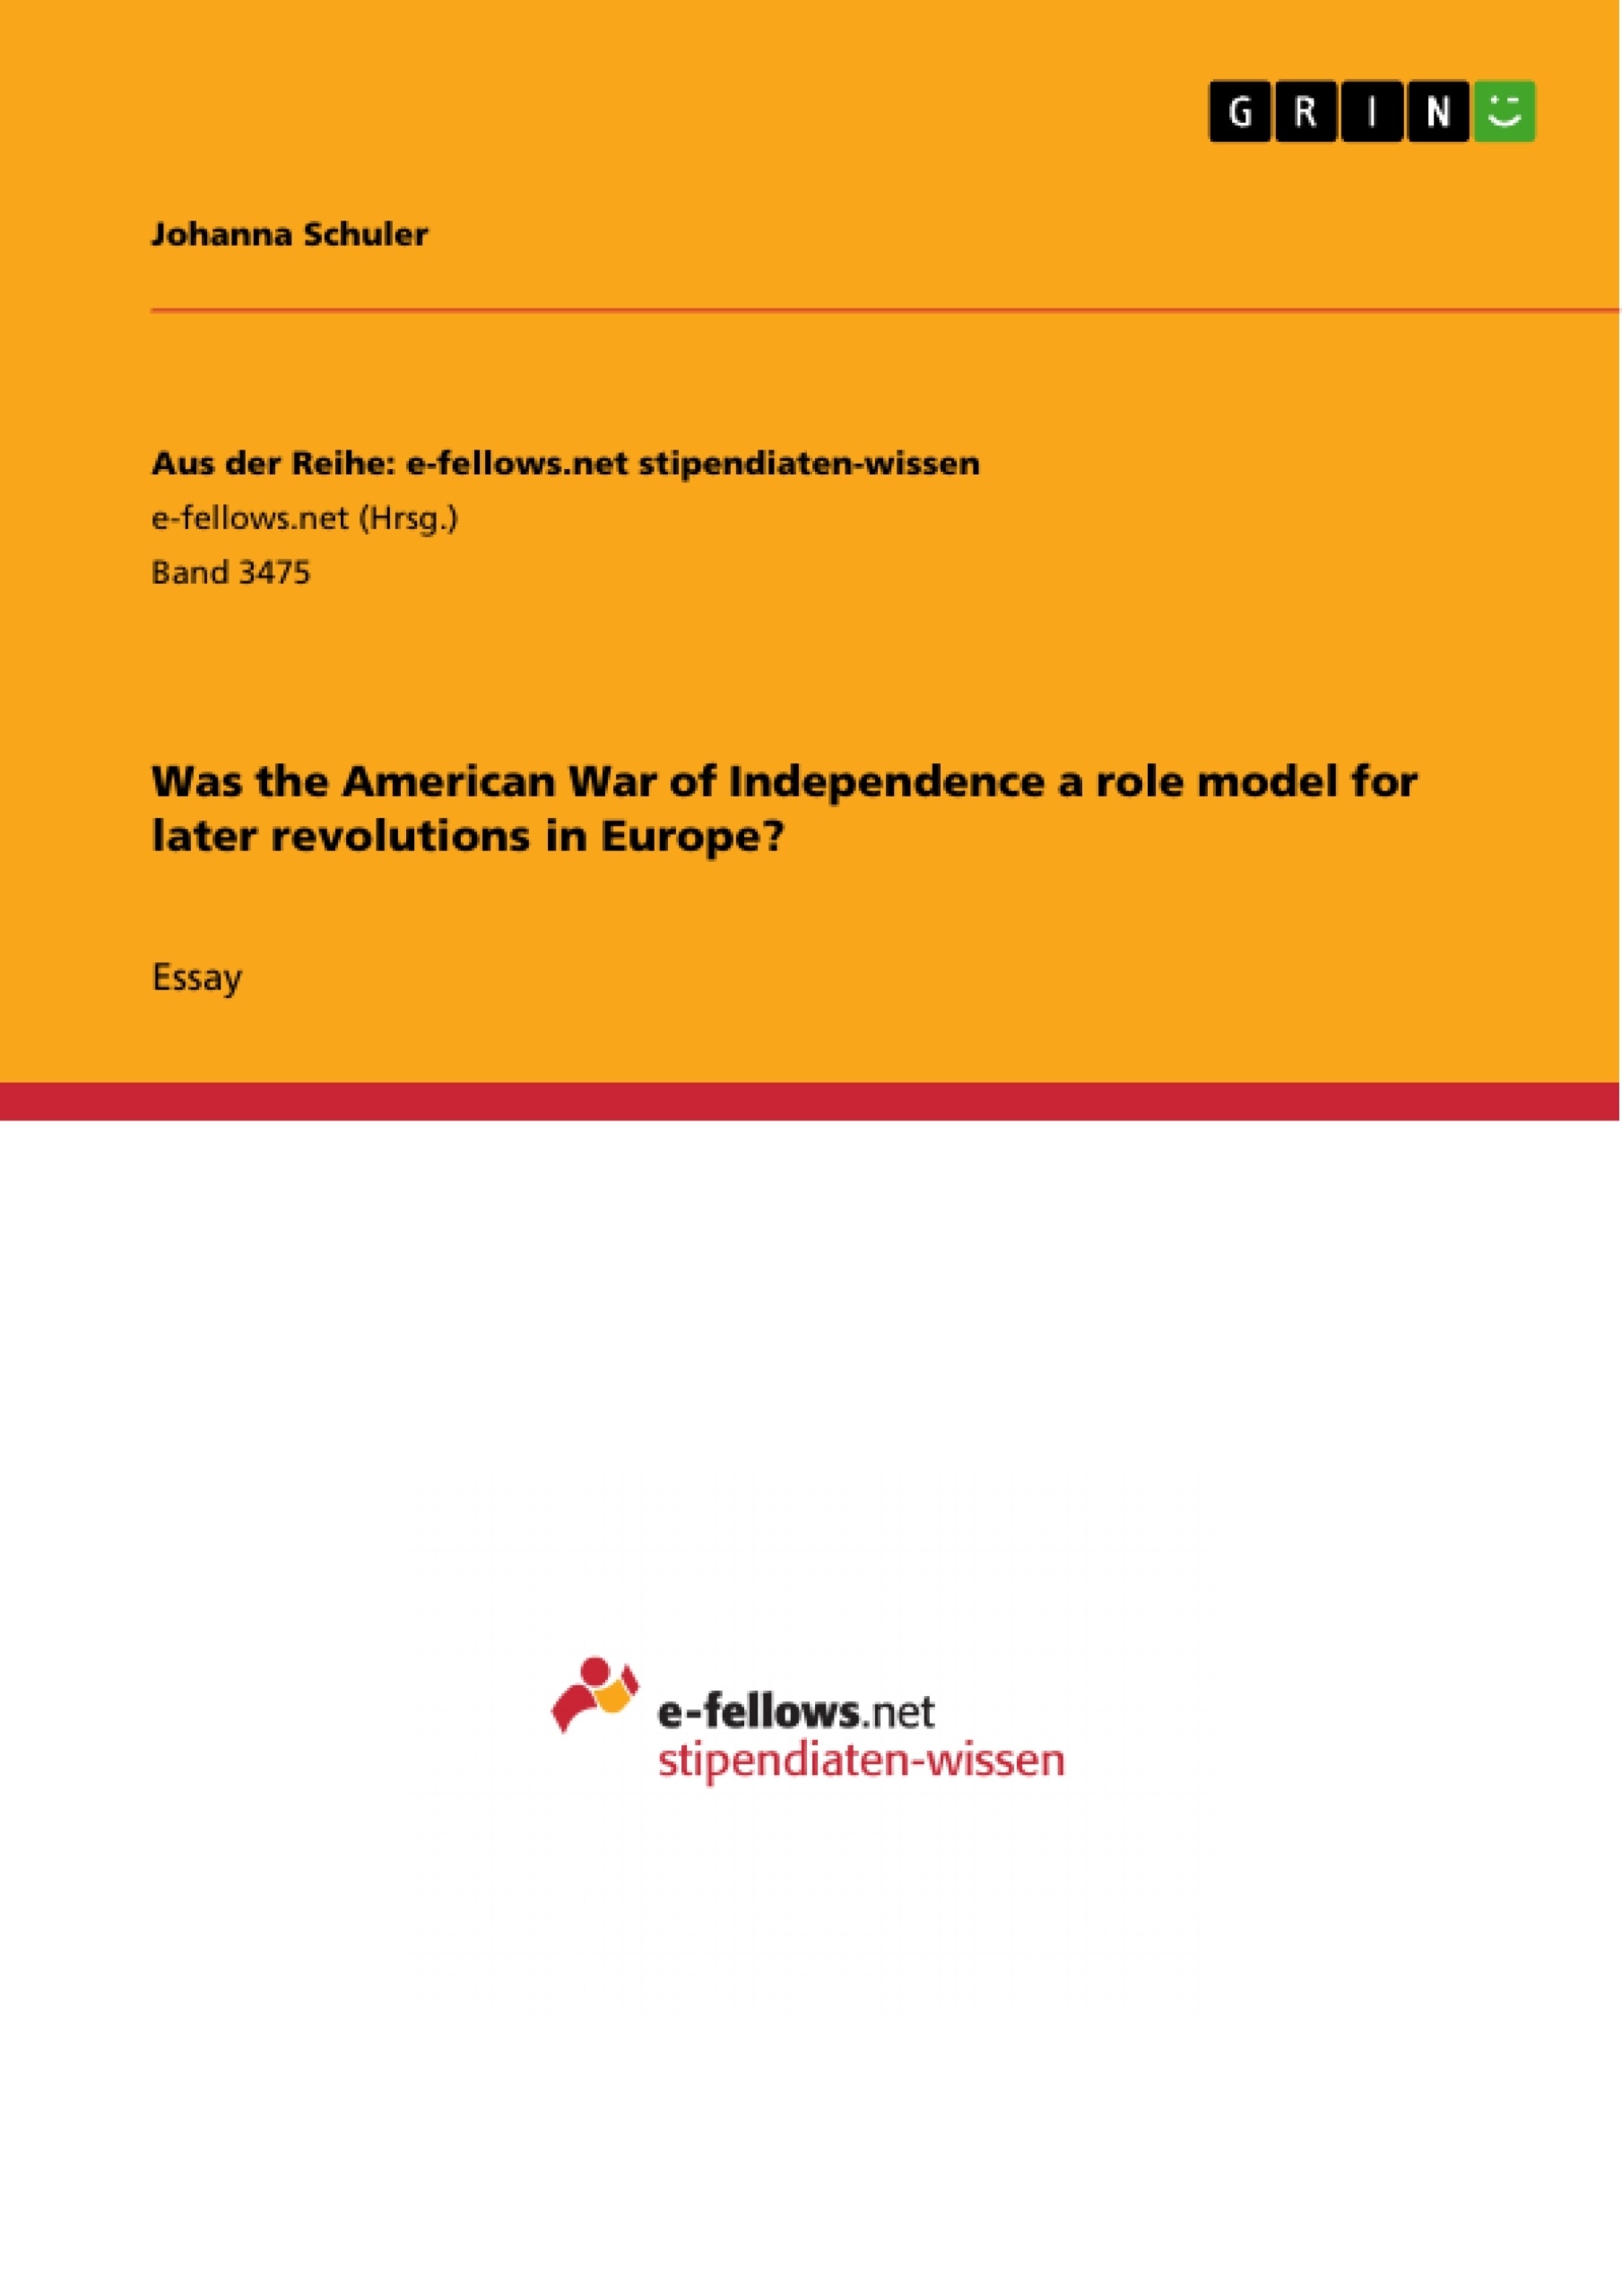 Título: Was the American War of Independence a role model for later revolutions in Europe?